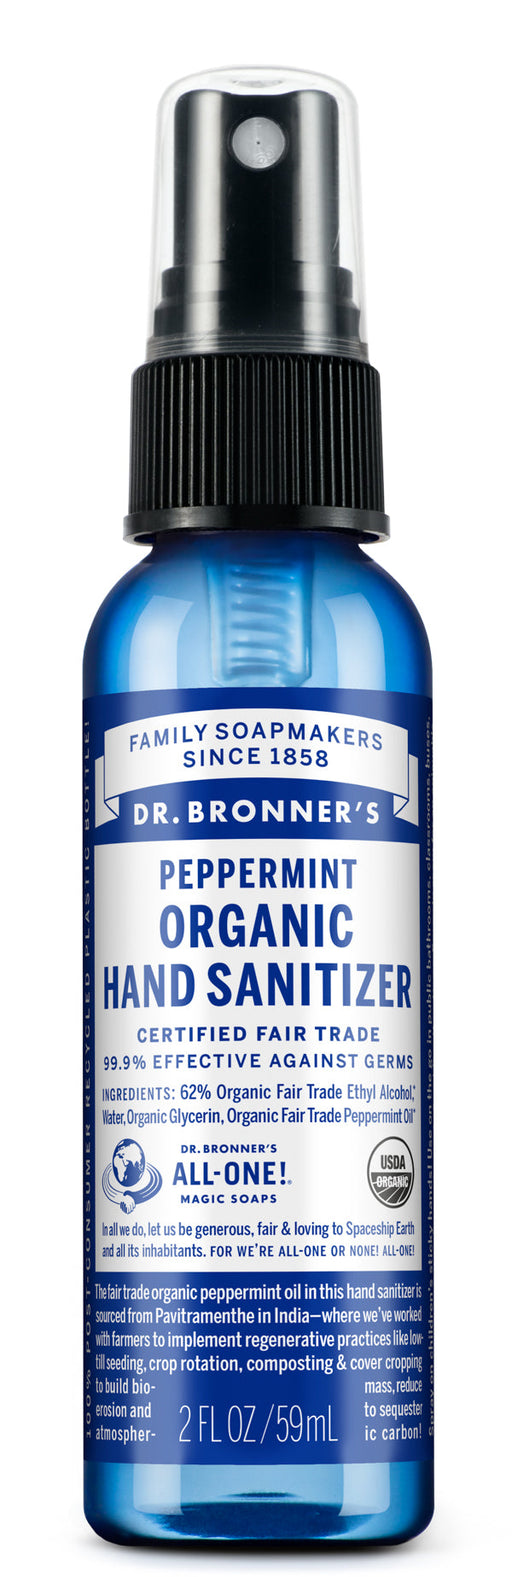 Peppermint - Organic Hand Sanitizer - ProCare Outlet by Dr Bronner's